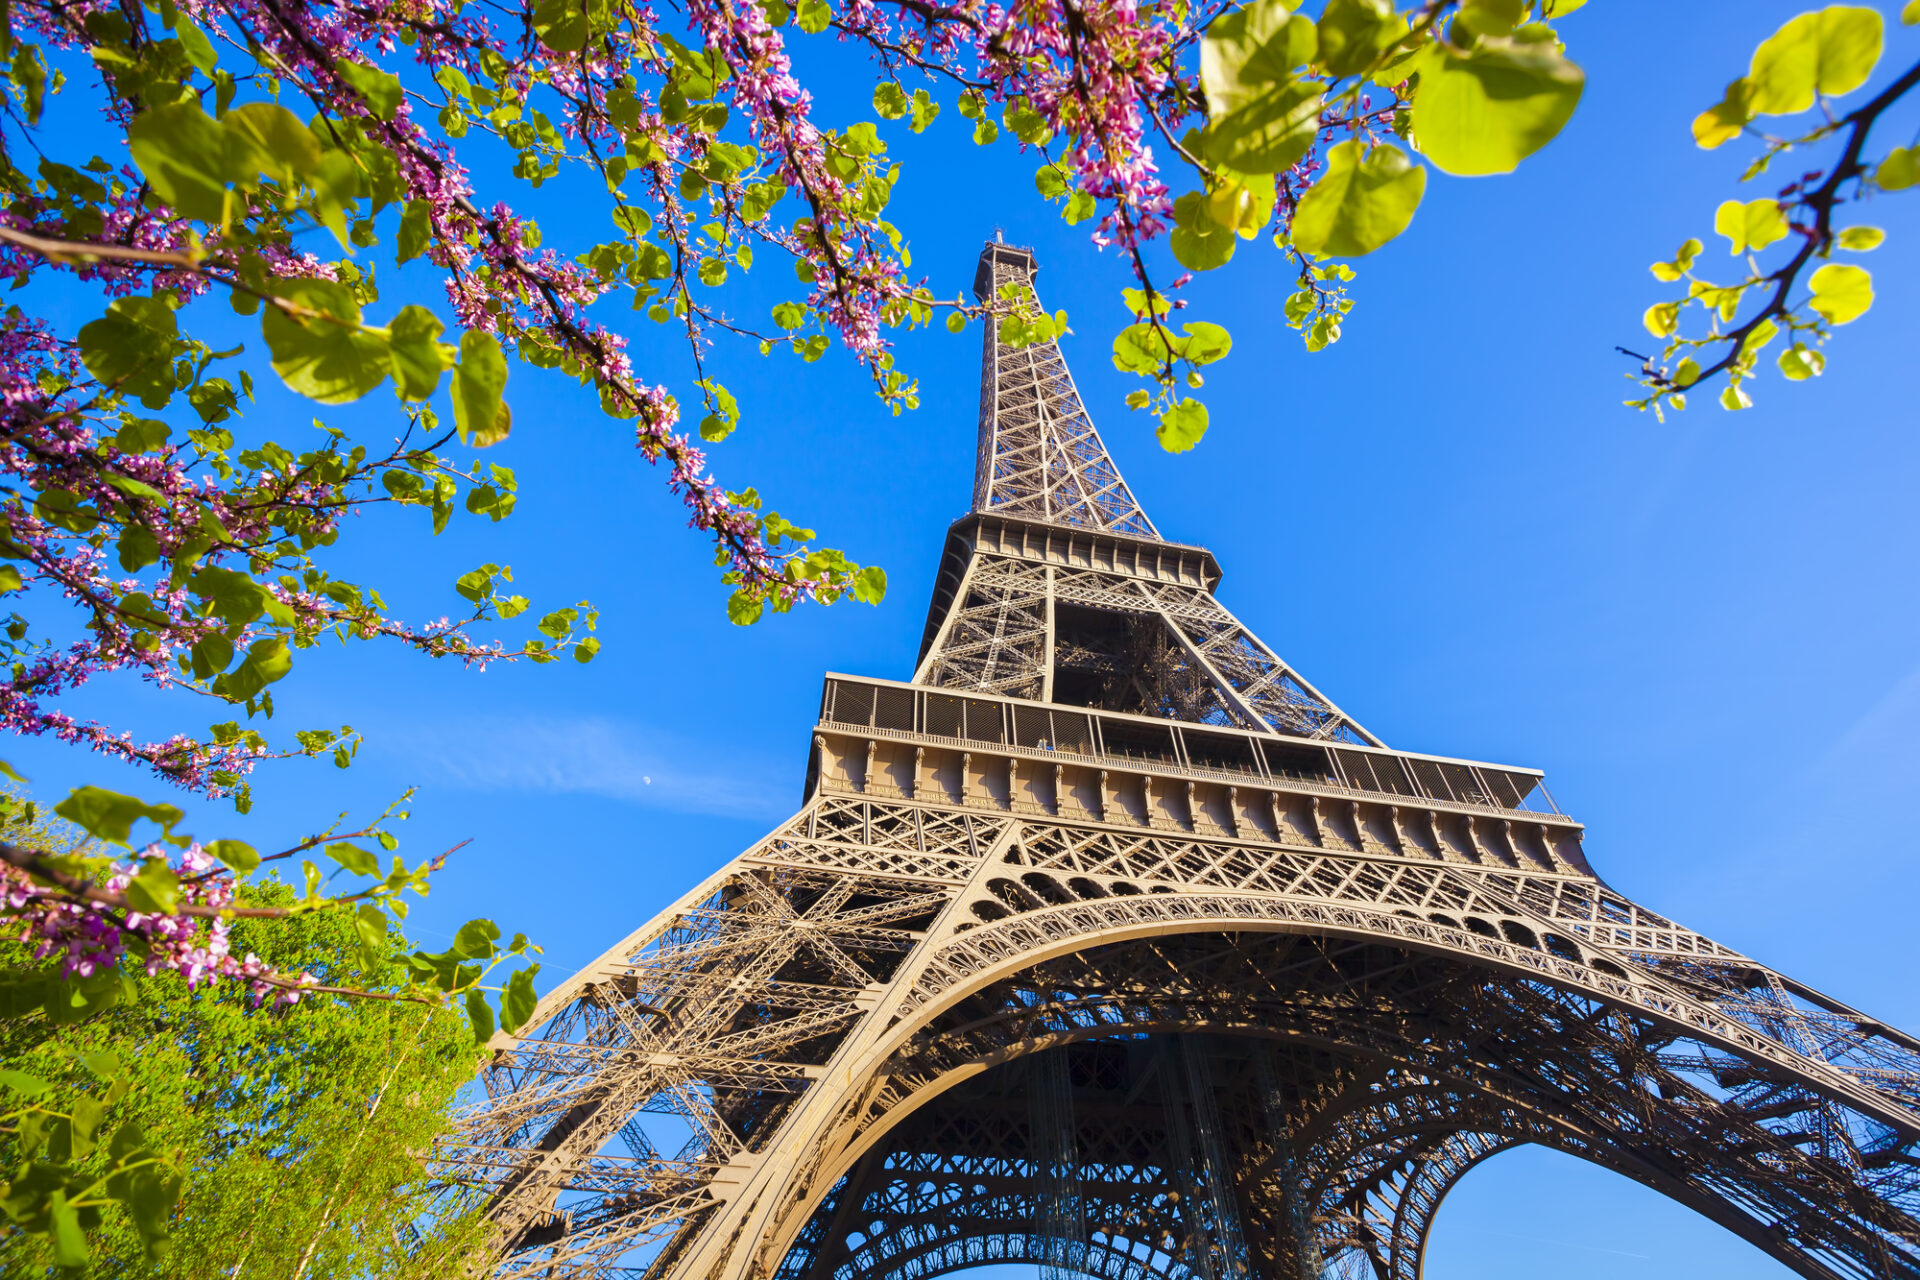 A Guide to Visiting Paris in the Spring